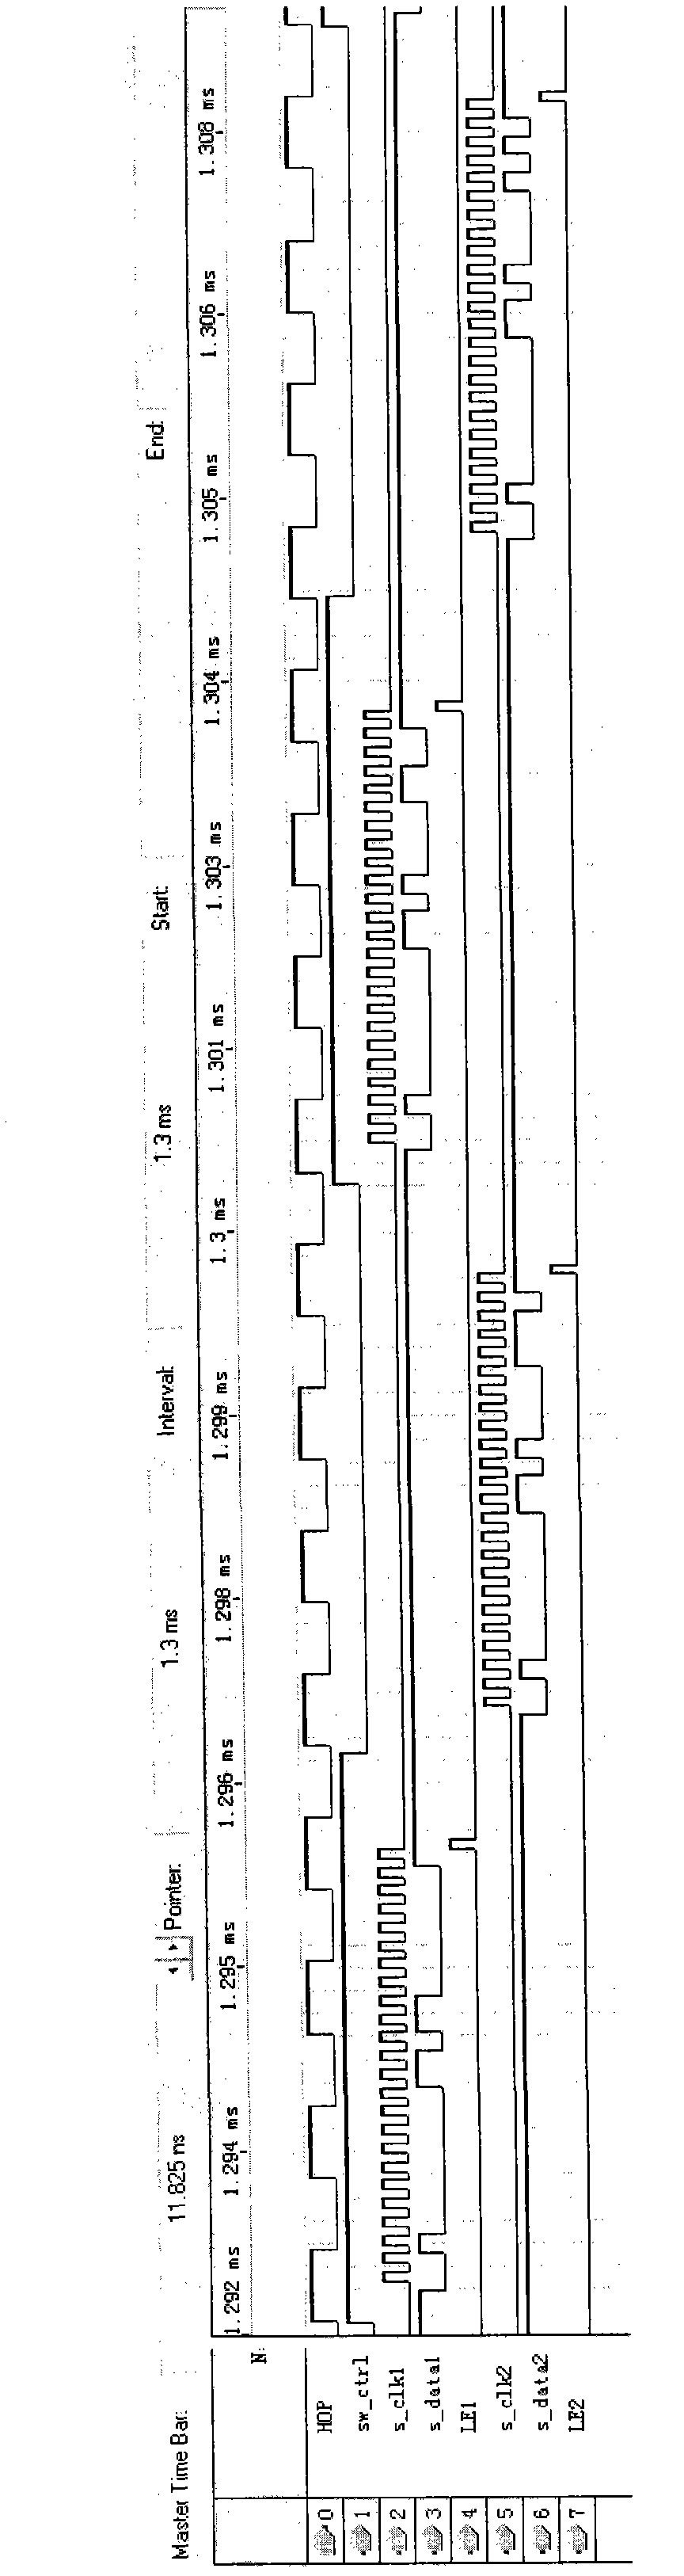 Method for generating stepped frequency signals based on combination of direct digital synthesis (DDS) and ping-pong phase locked loop